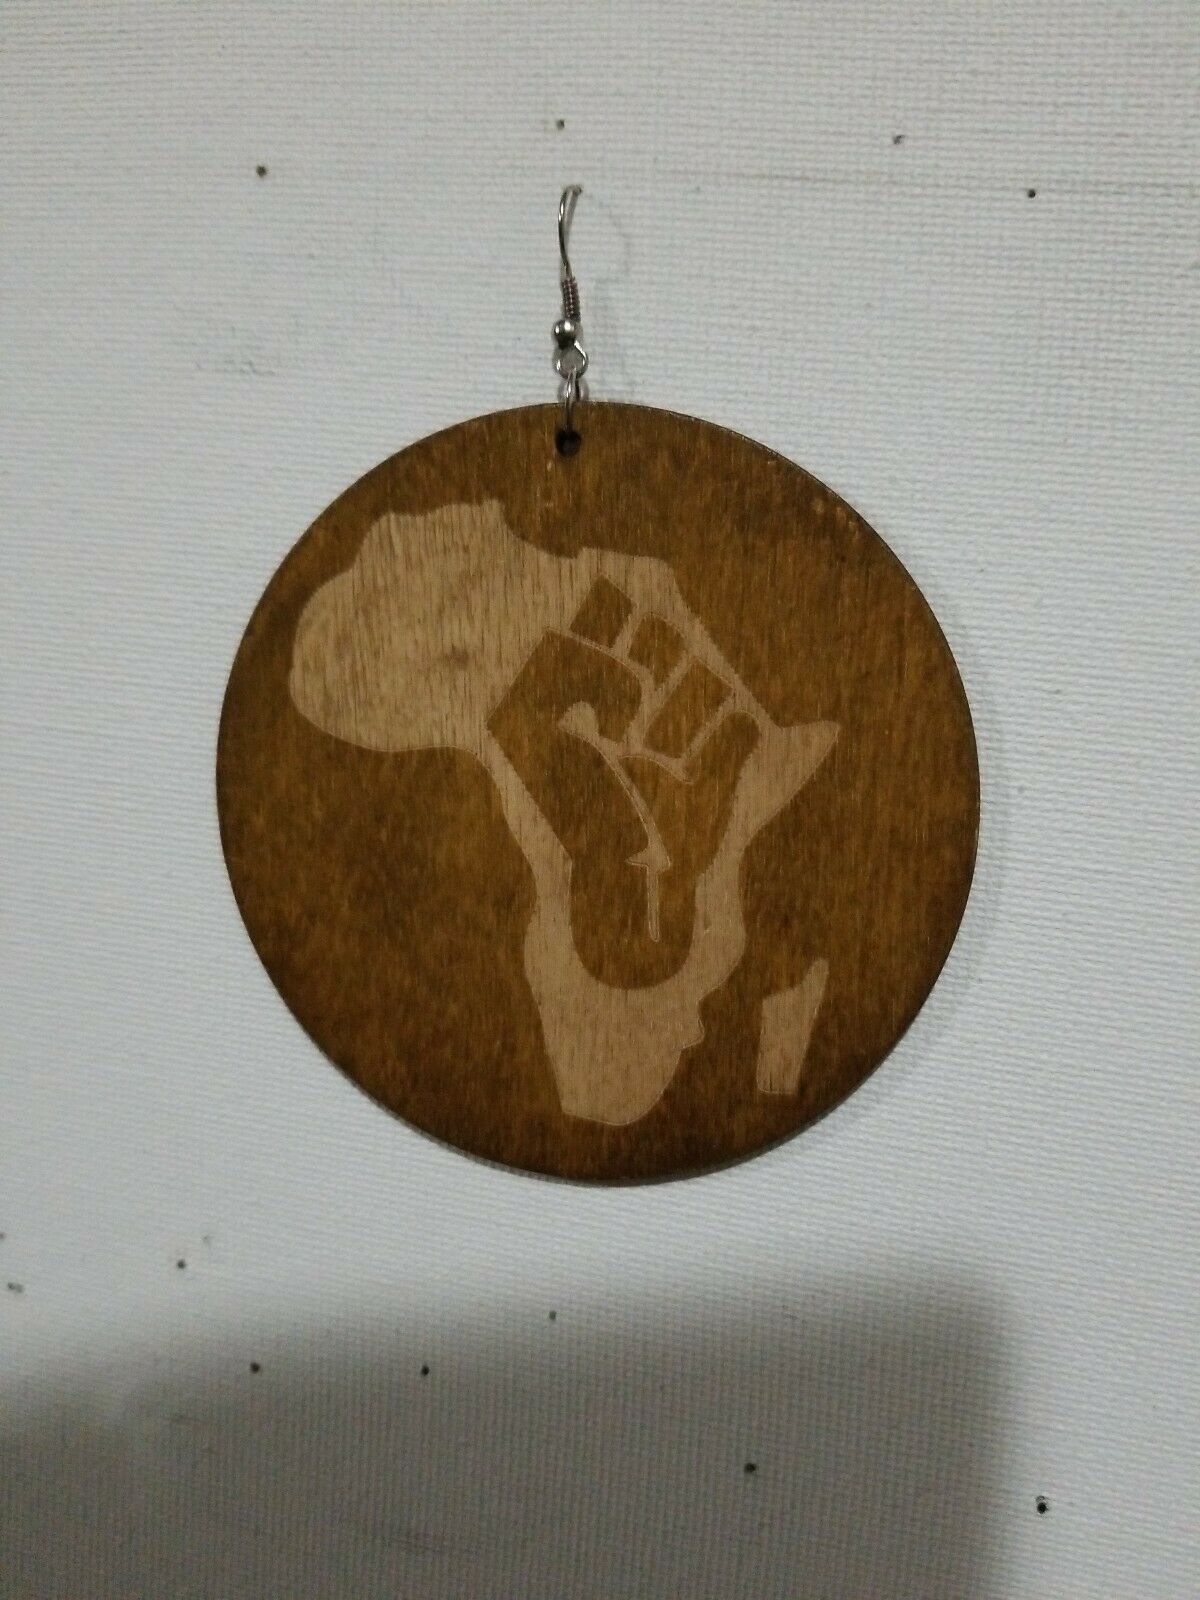 Wooden Large Africa Map and Clinched fist.Light weight errings